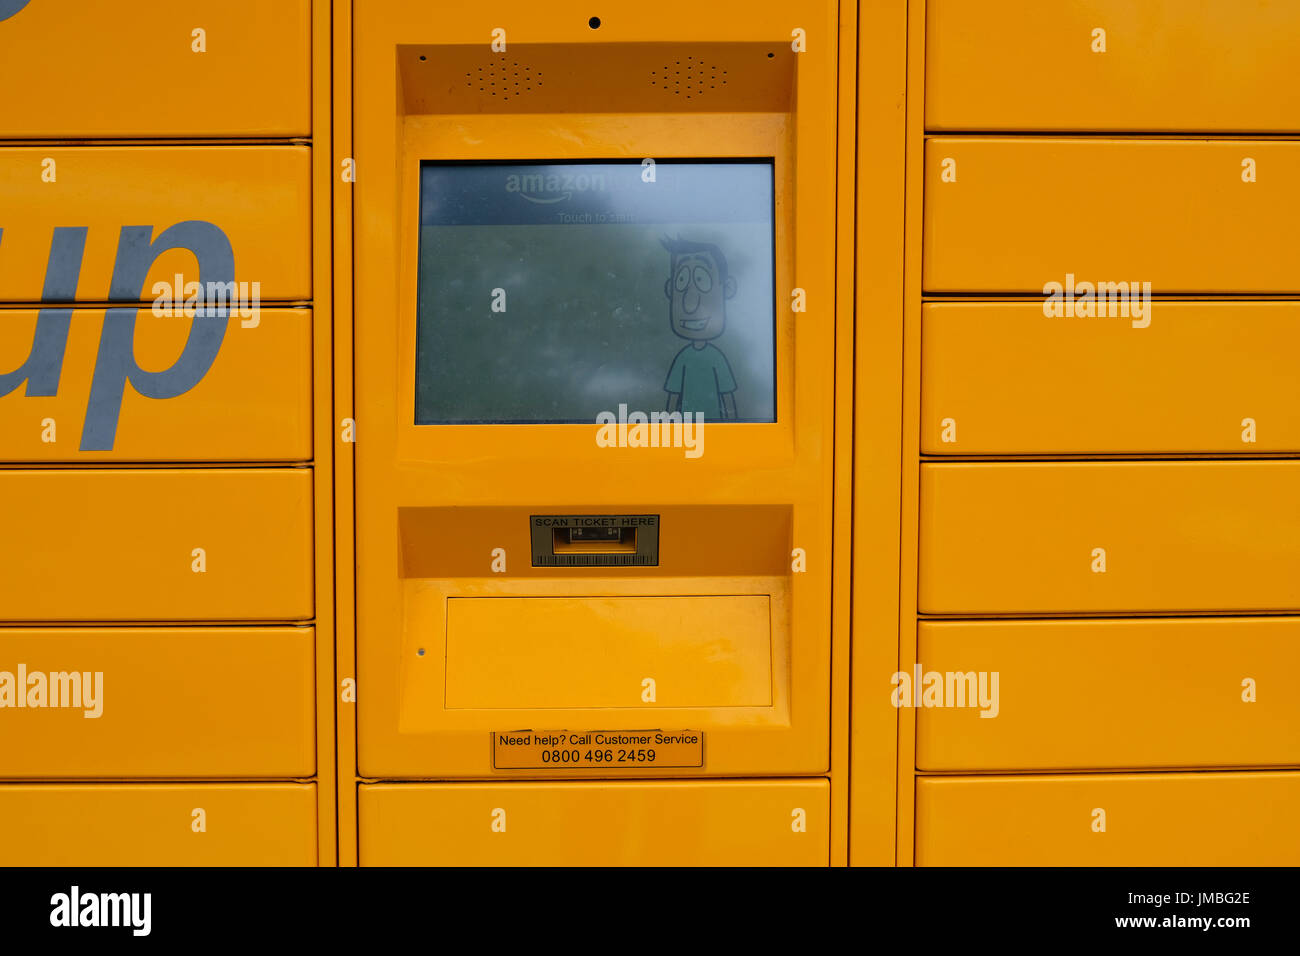 Bright yellow Amazon Locker called Binky situated in forecourt of service station. Worthing, UK Stock Photo